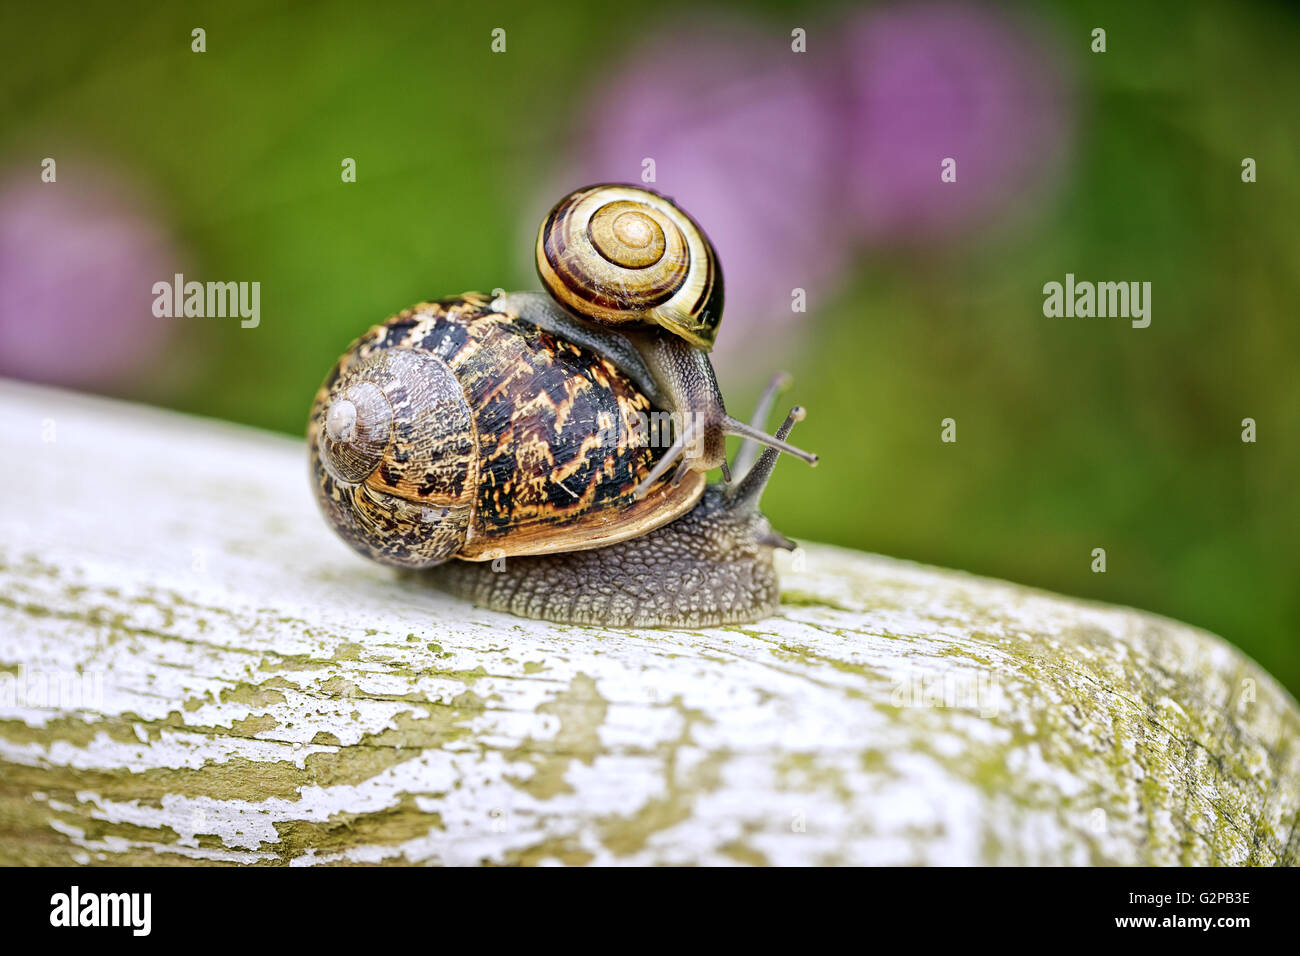 Large Snail carrying small snail on her back in the garden in summer Stock Photo